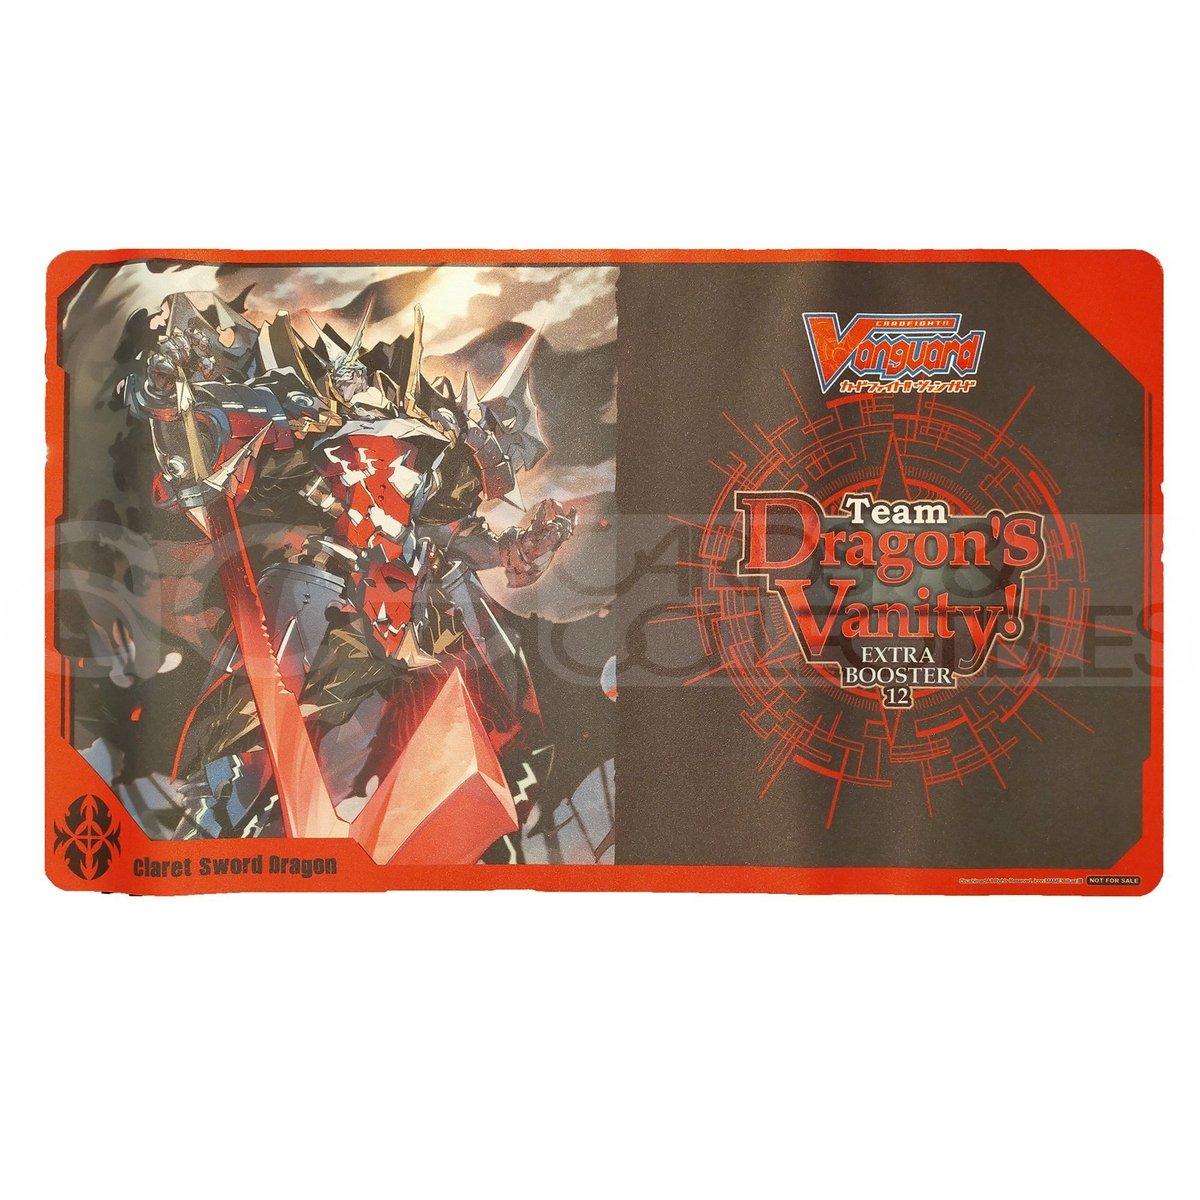 Cardfight Vanguard Playmat "Claret Aword Dragon" (VG-V-EB12)-Bushiroad-Ace Cards & Collectibles